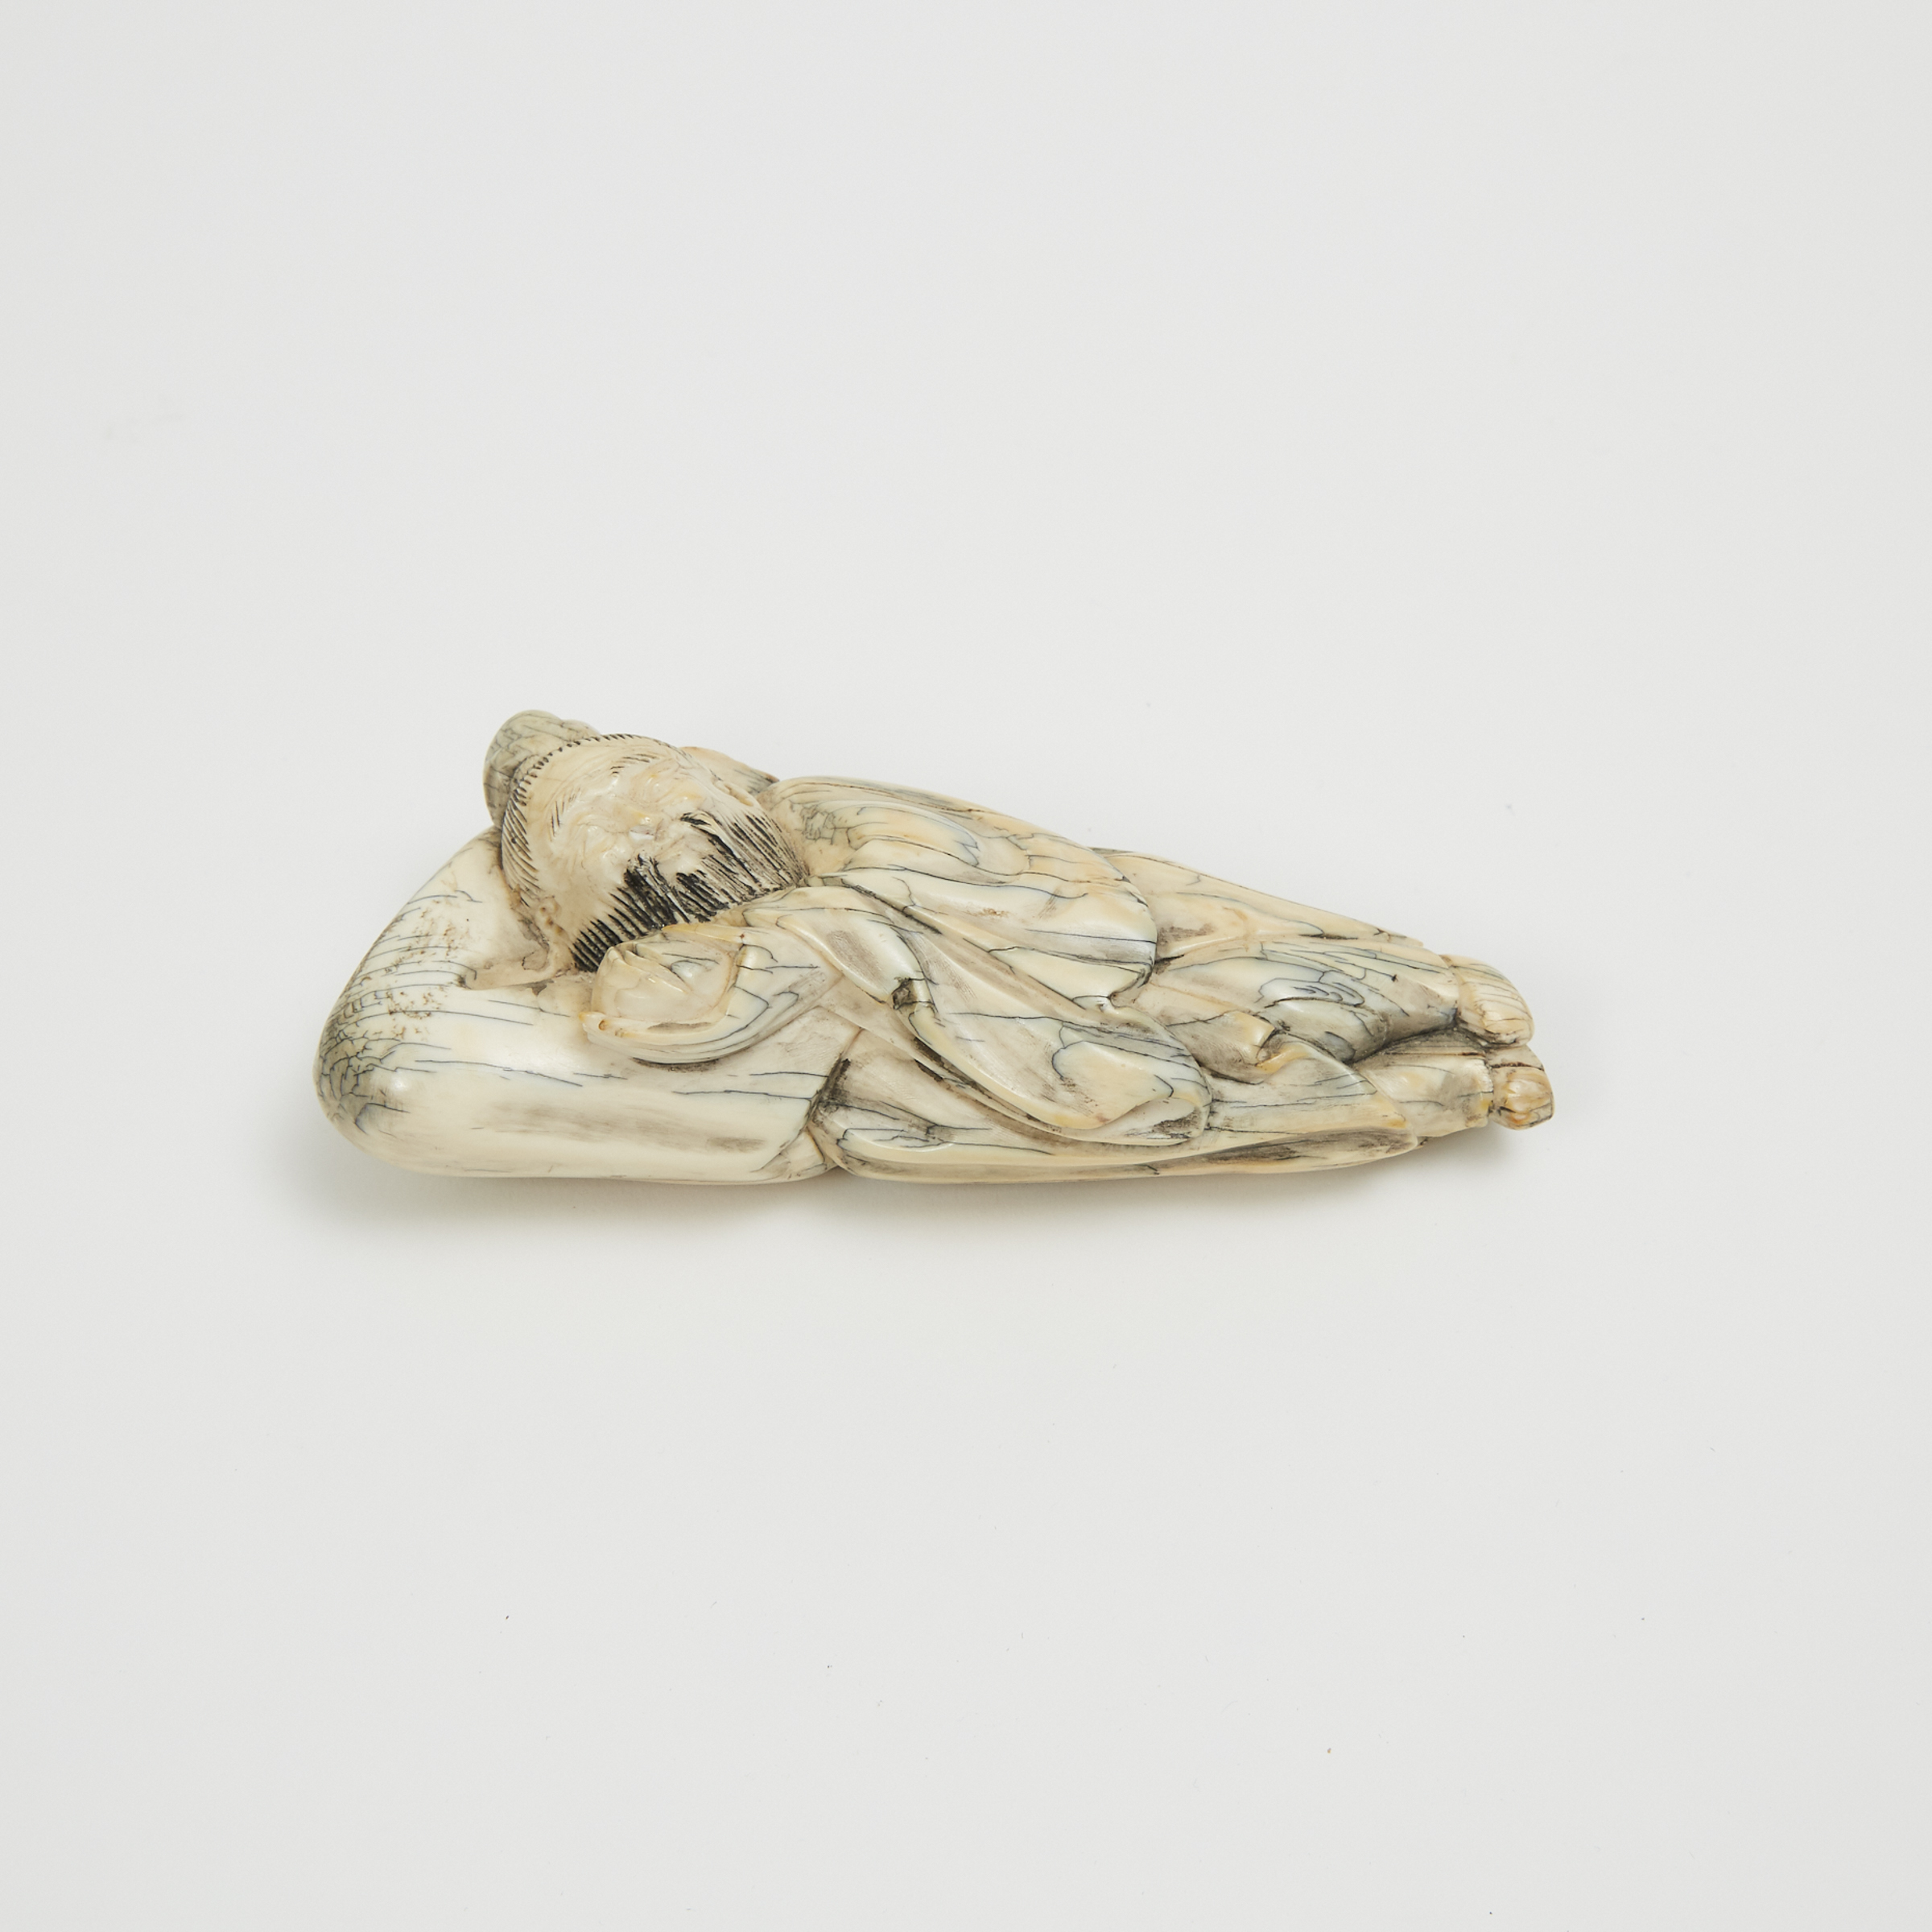 An Ivory Carved Figure of a Reclining Sage